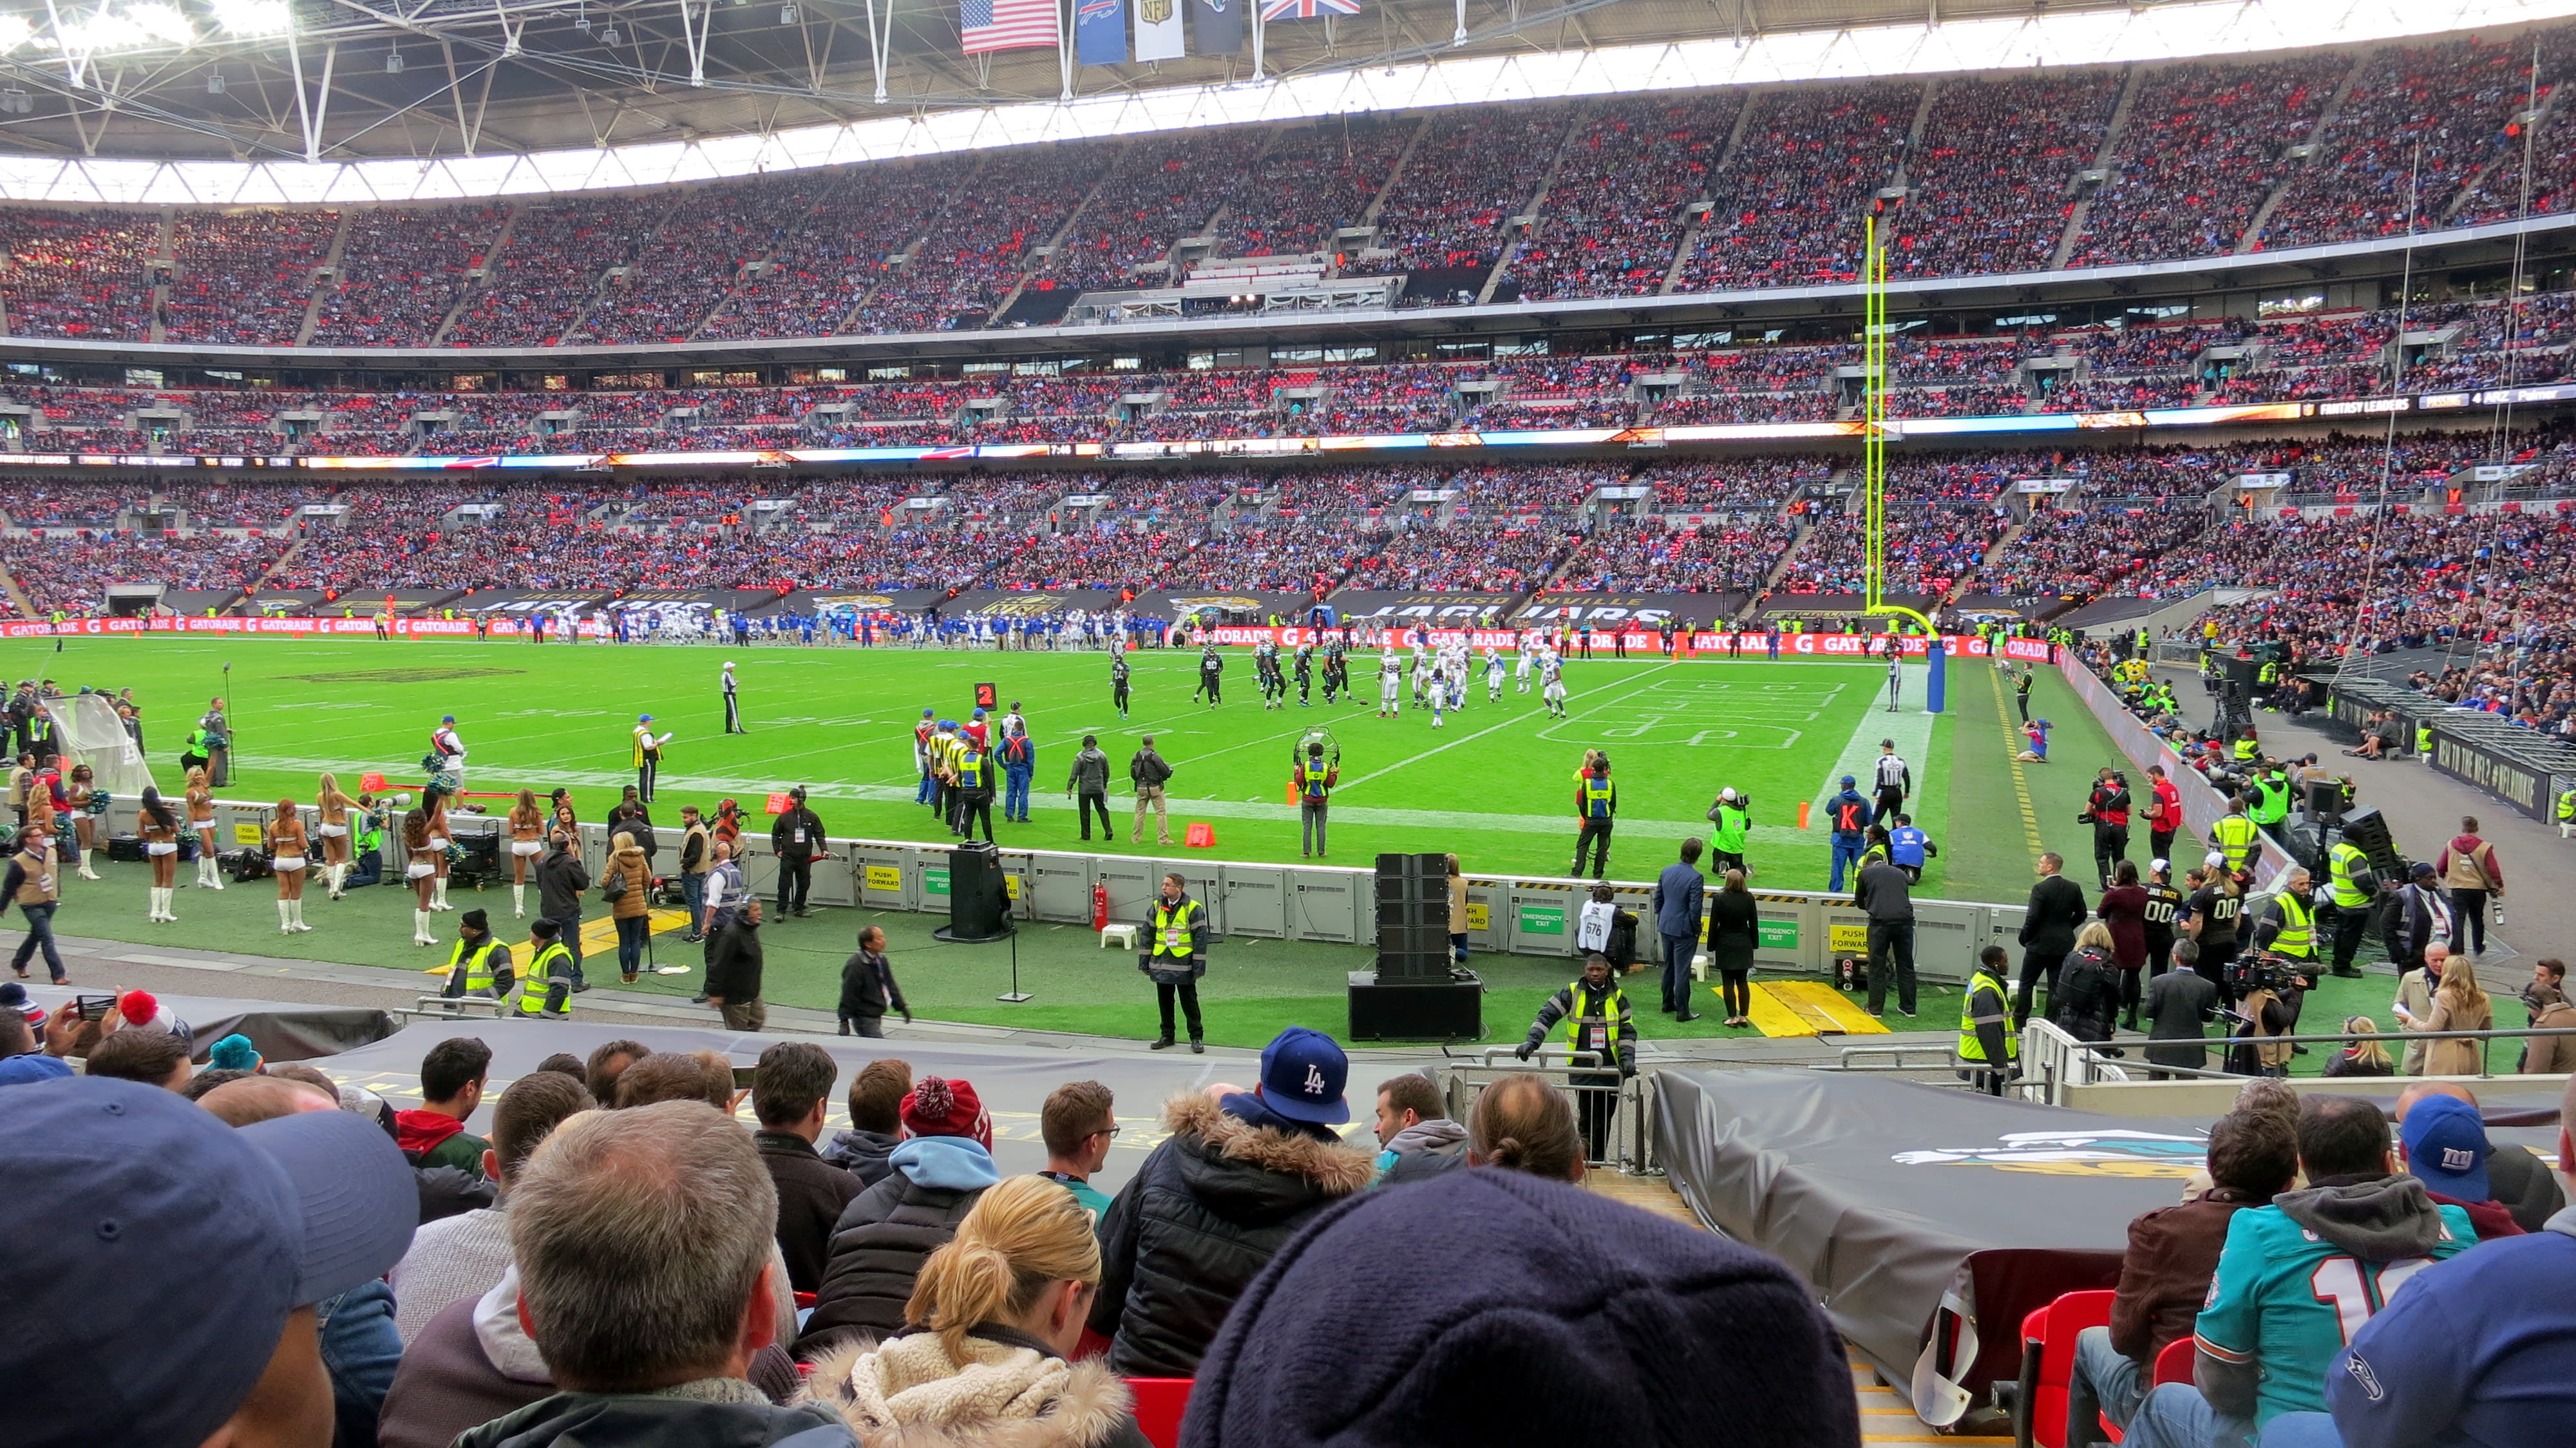 Fans watching an NFL London game featuring the Jacksonville Jaguars.